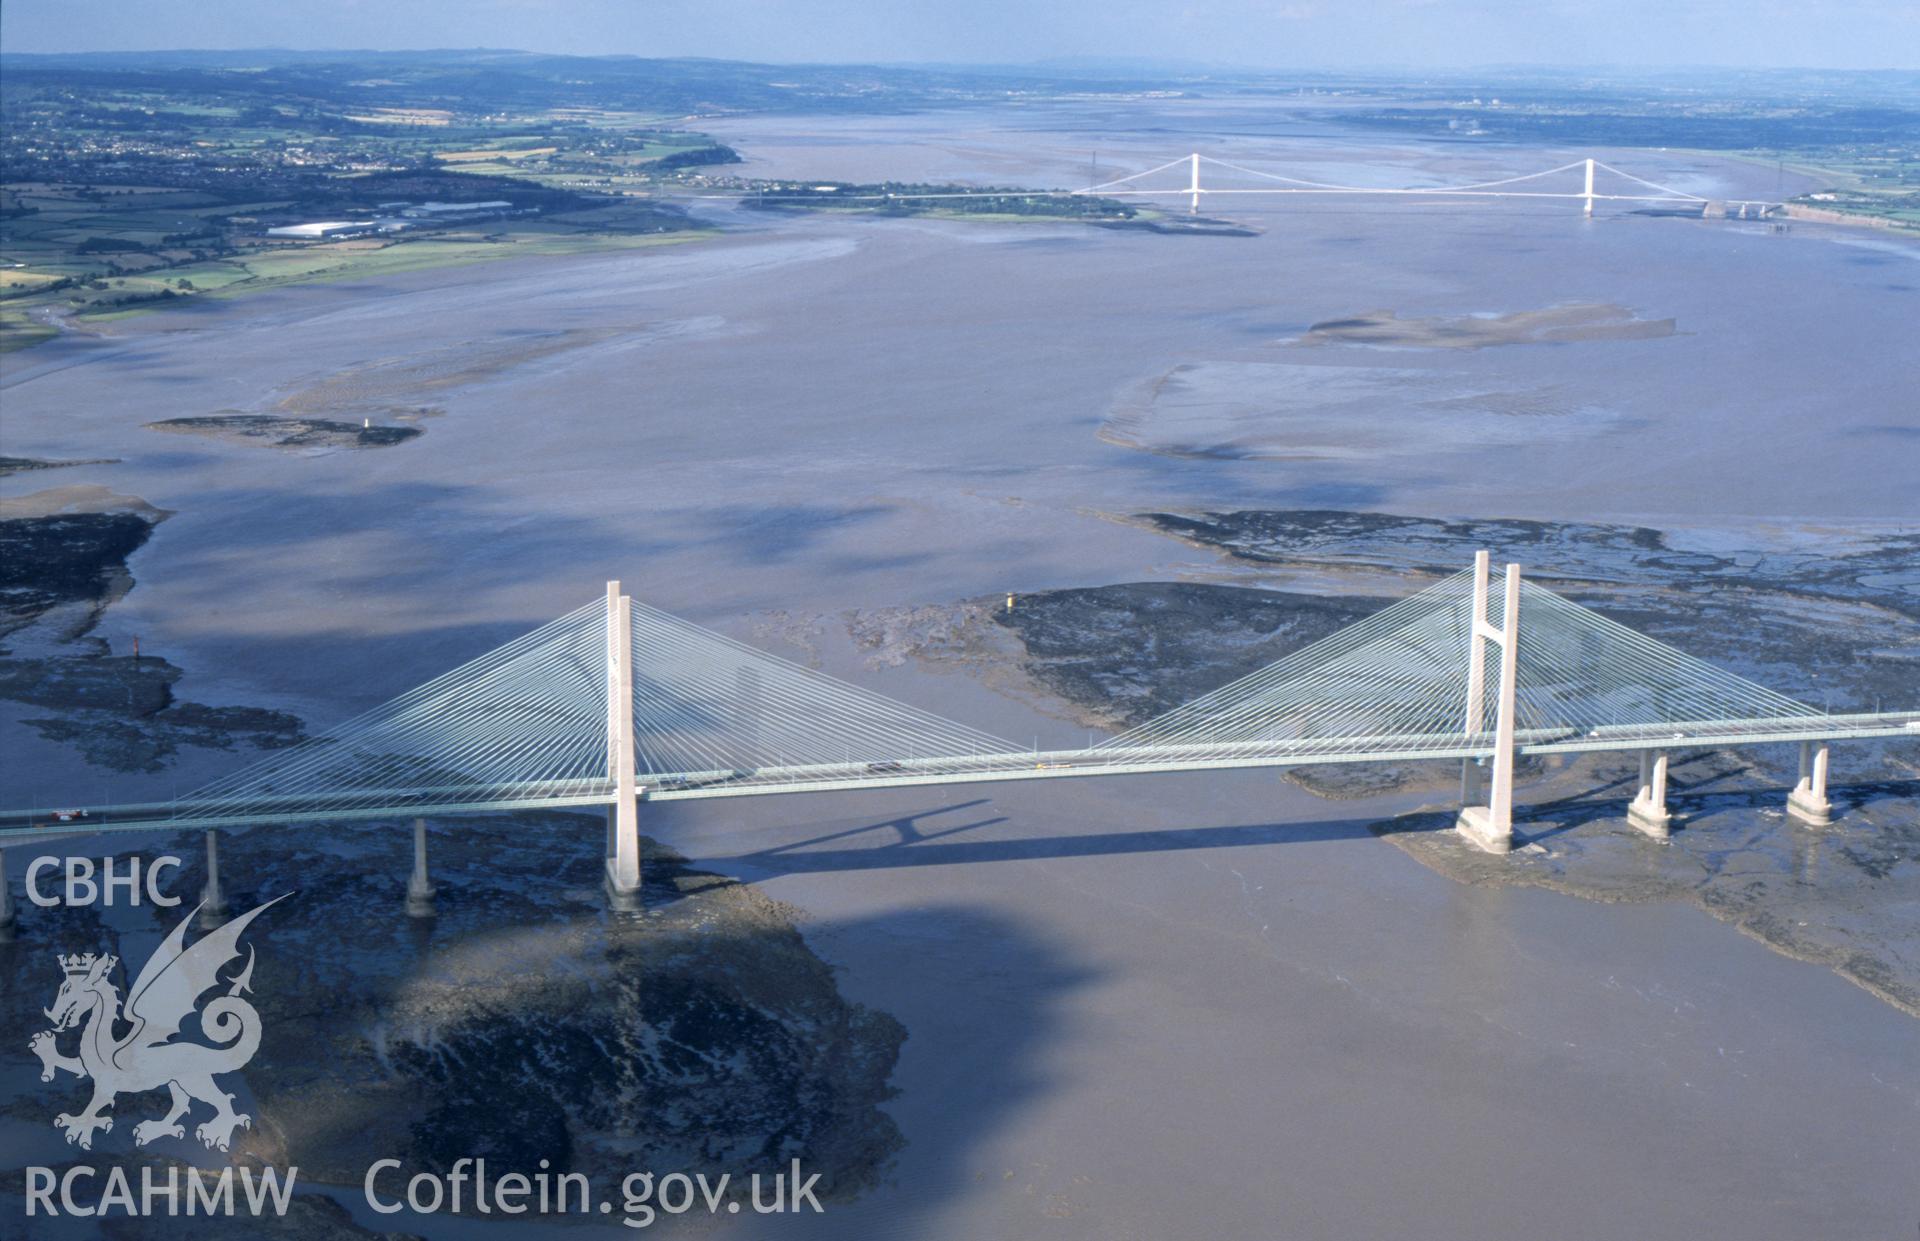 RCAHMW colour slide oblique aerial photograph of the second Severn Crossing, taken by Toby Driver, 2001